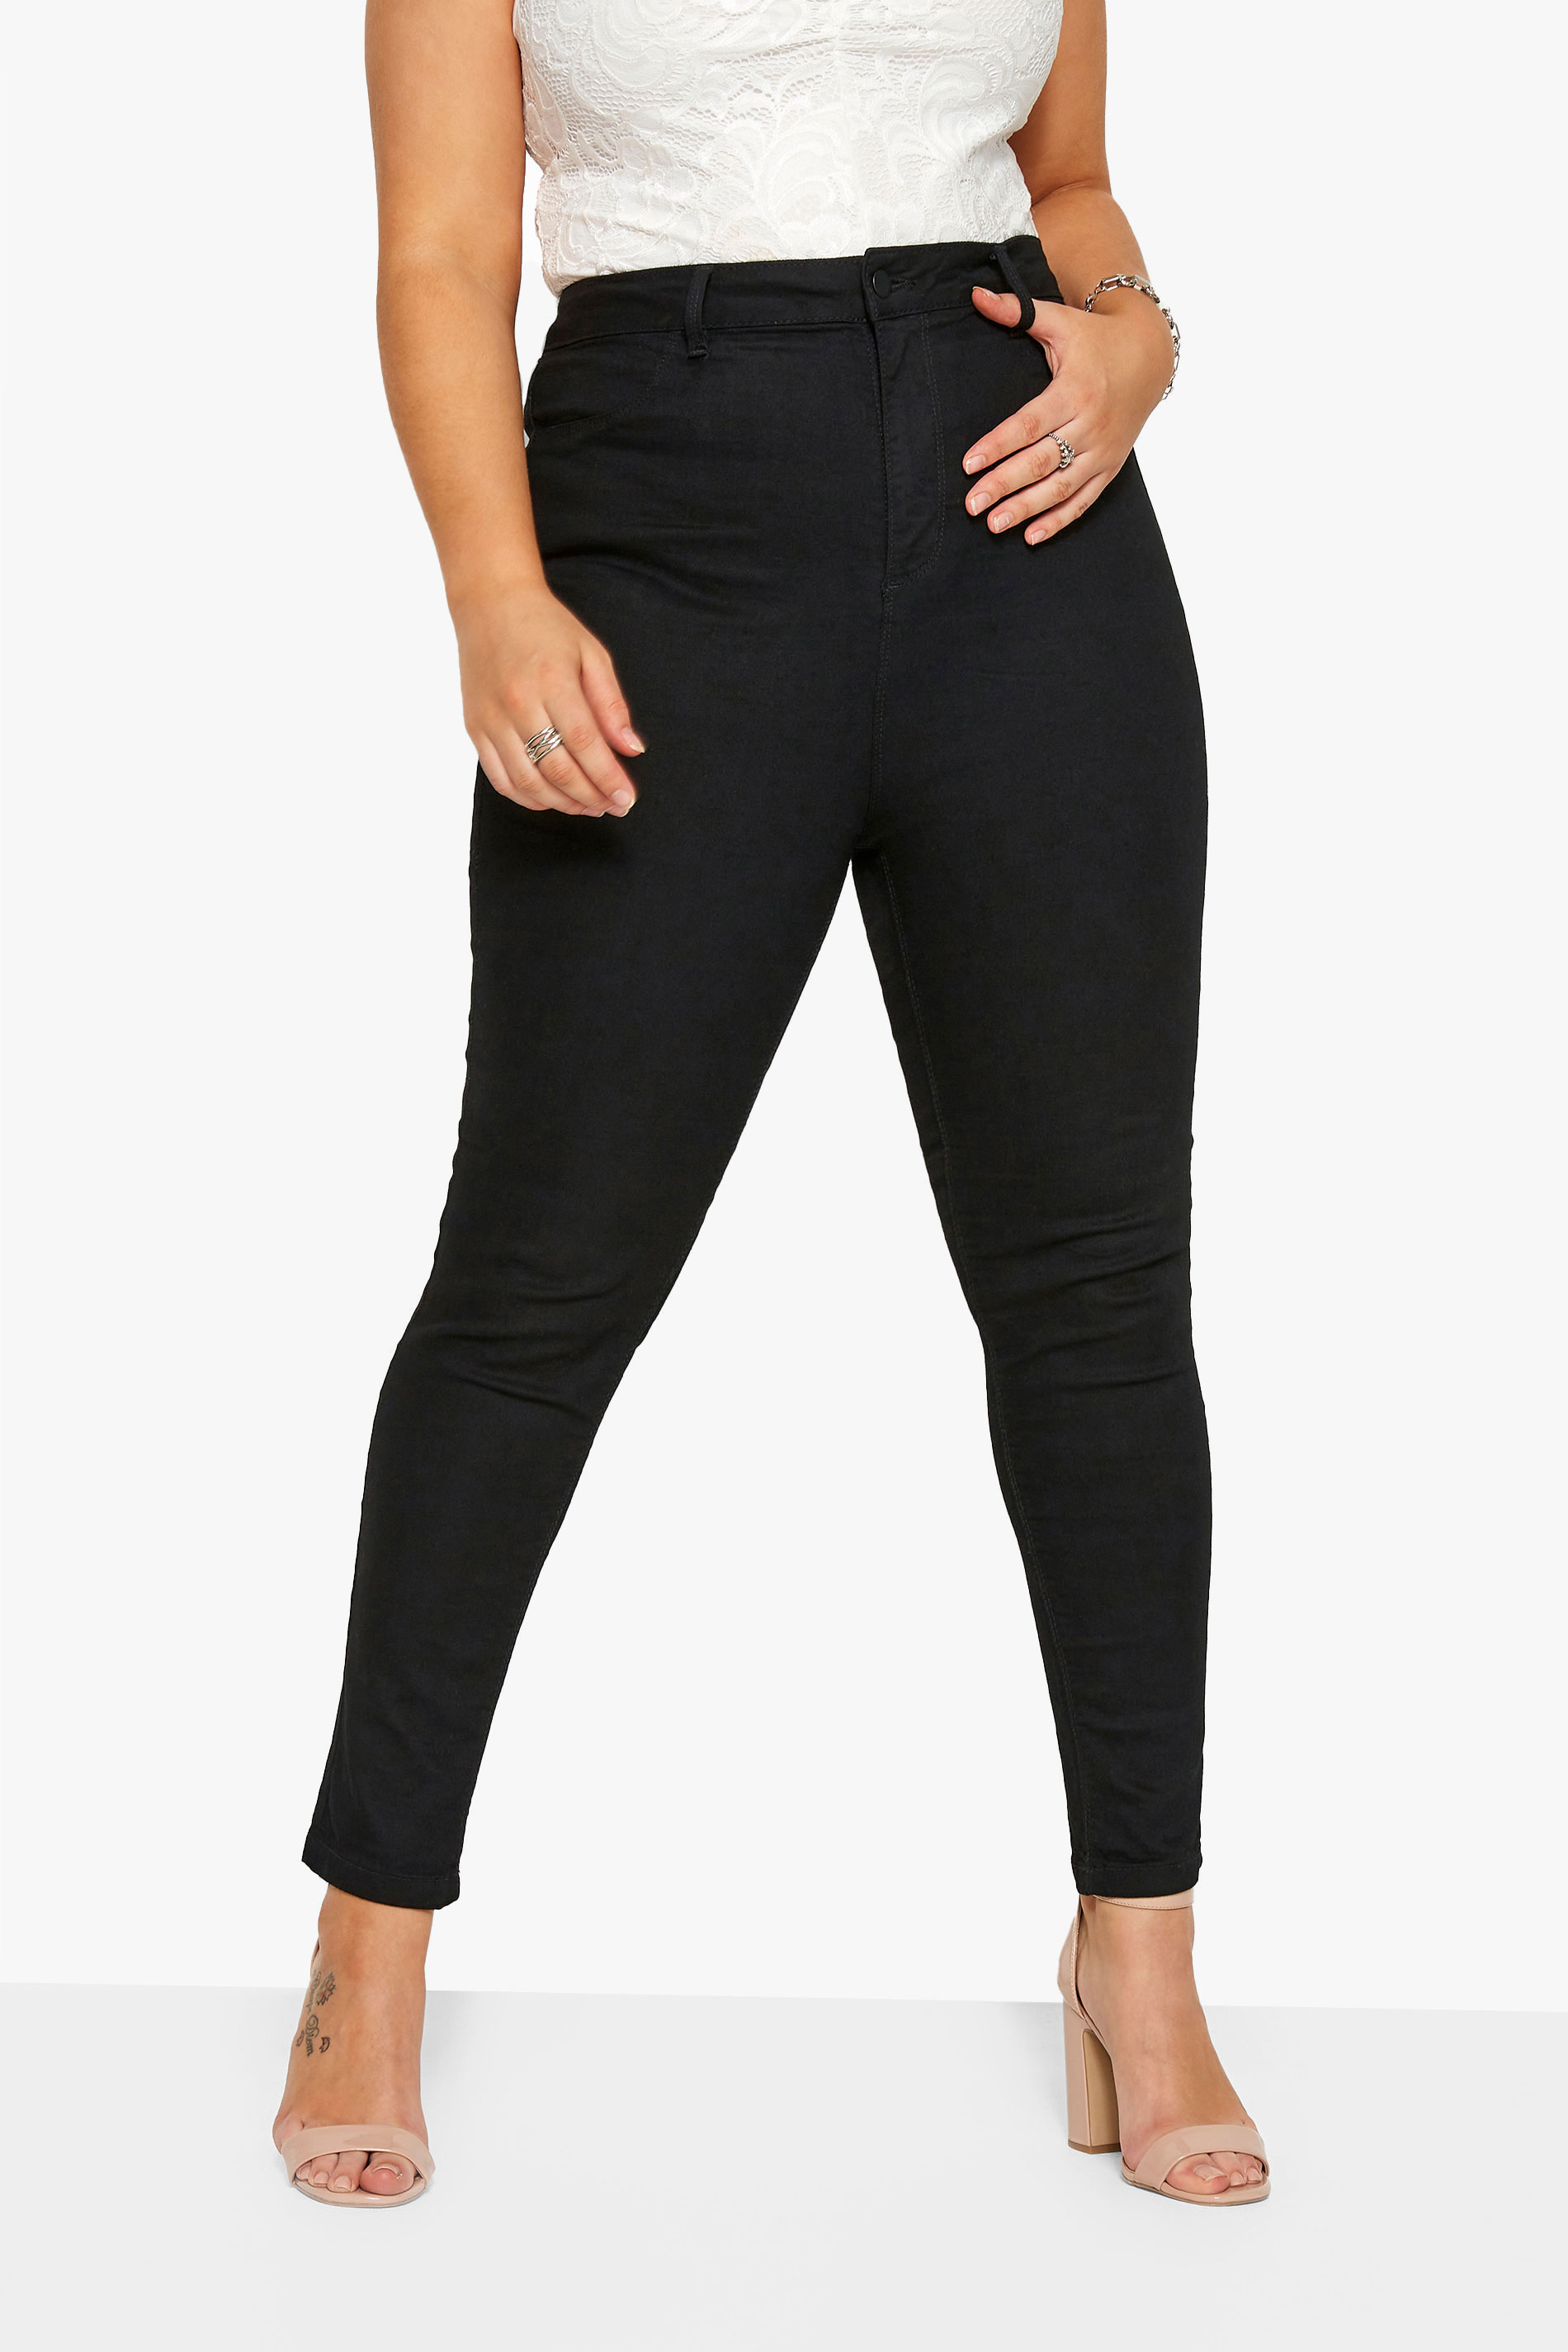 YOURS FOR GOOD Curve Black Skinny Stretch AVA Jeans_B.jpg